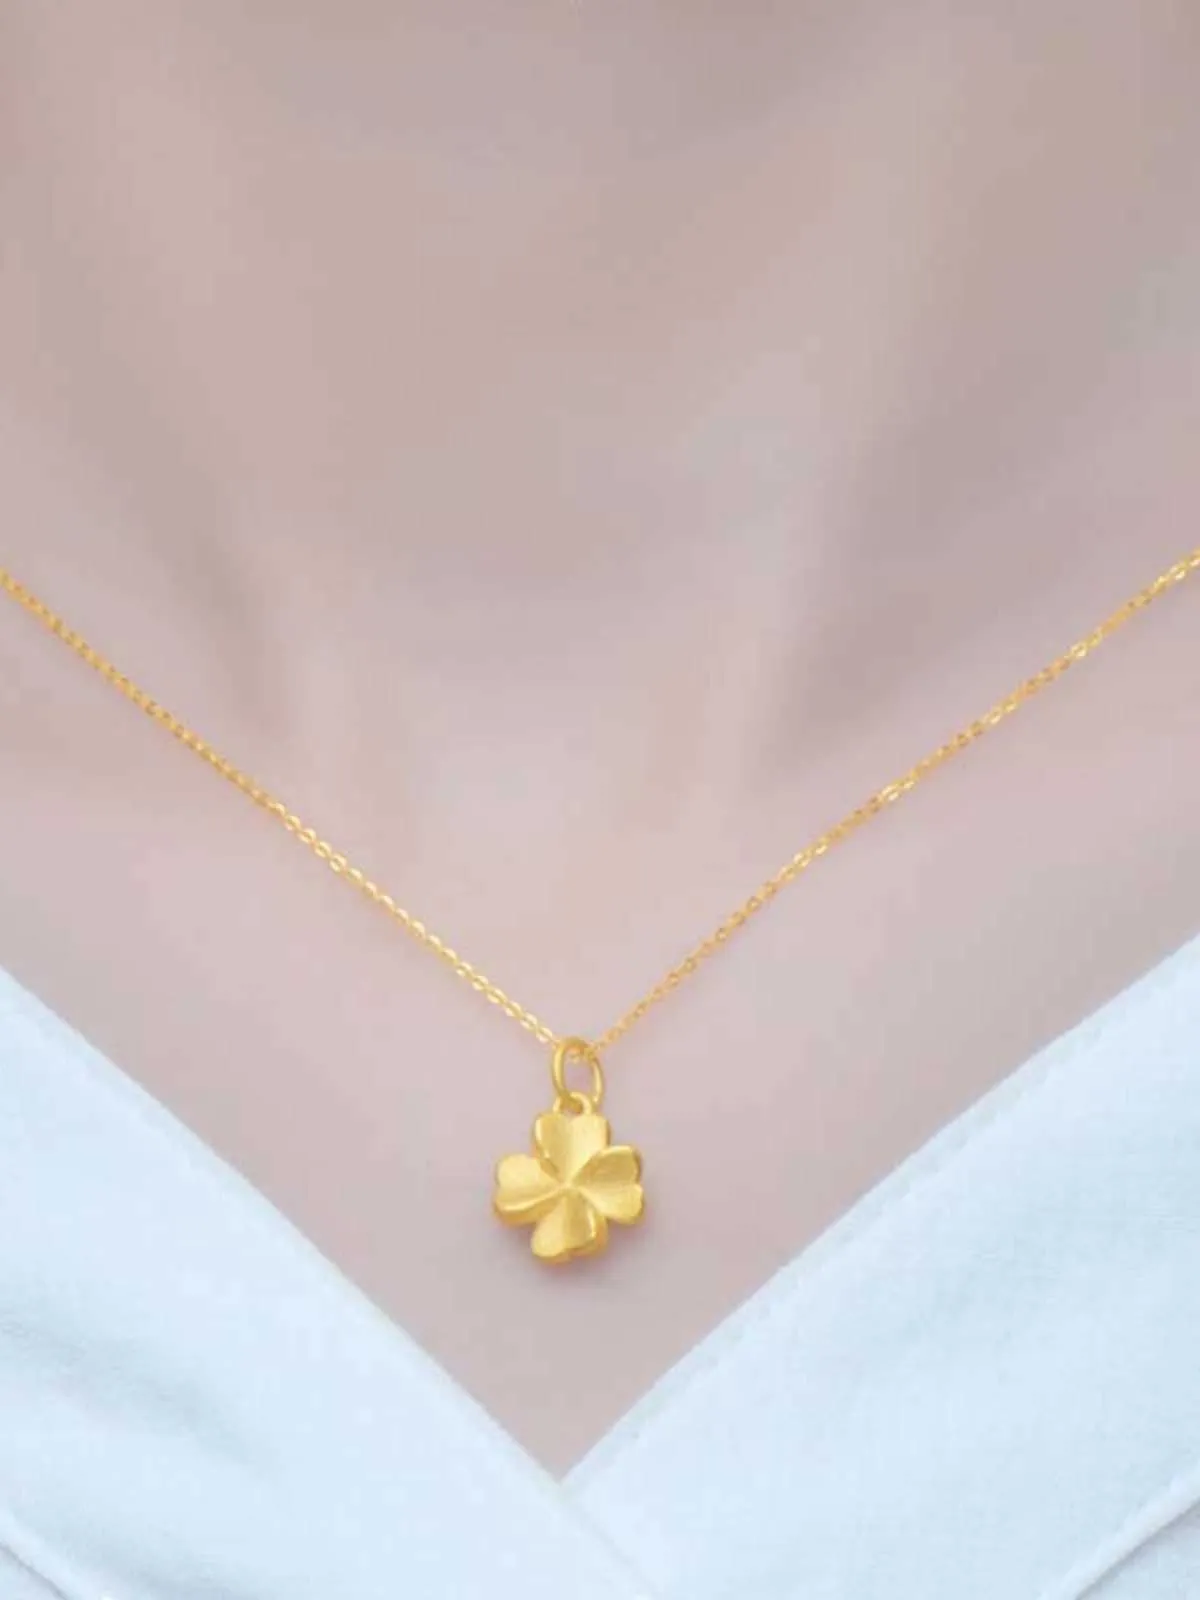 2024 Classic Four Leaf Clover Necklaces Pendants 999 Foot Golden Love Pendant 3D Hard Gold 24K Collar 18KO Character Necklace as a Gift for Girlfriend Apple